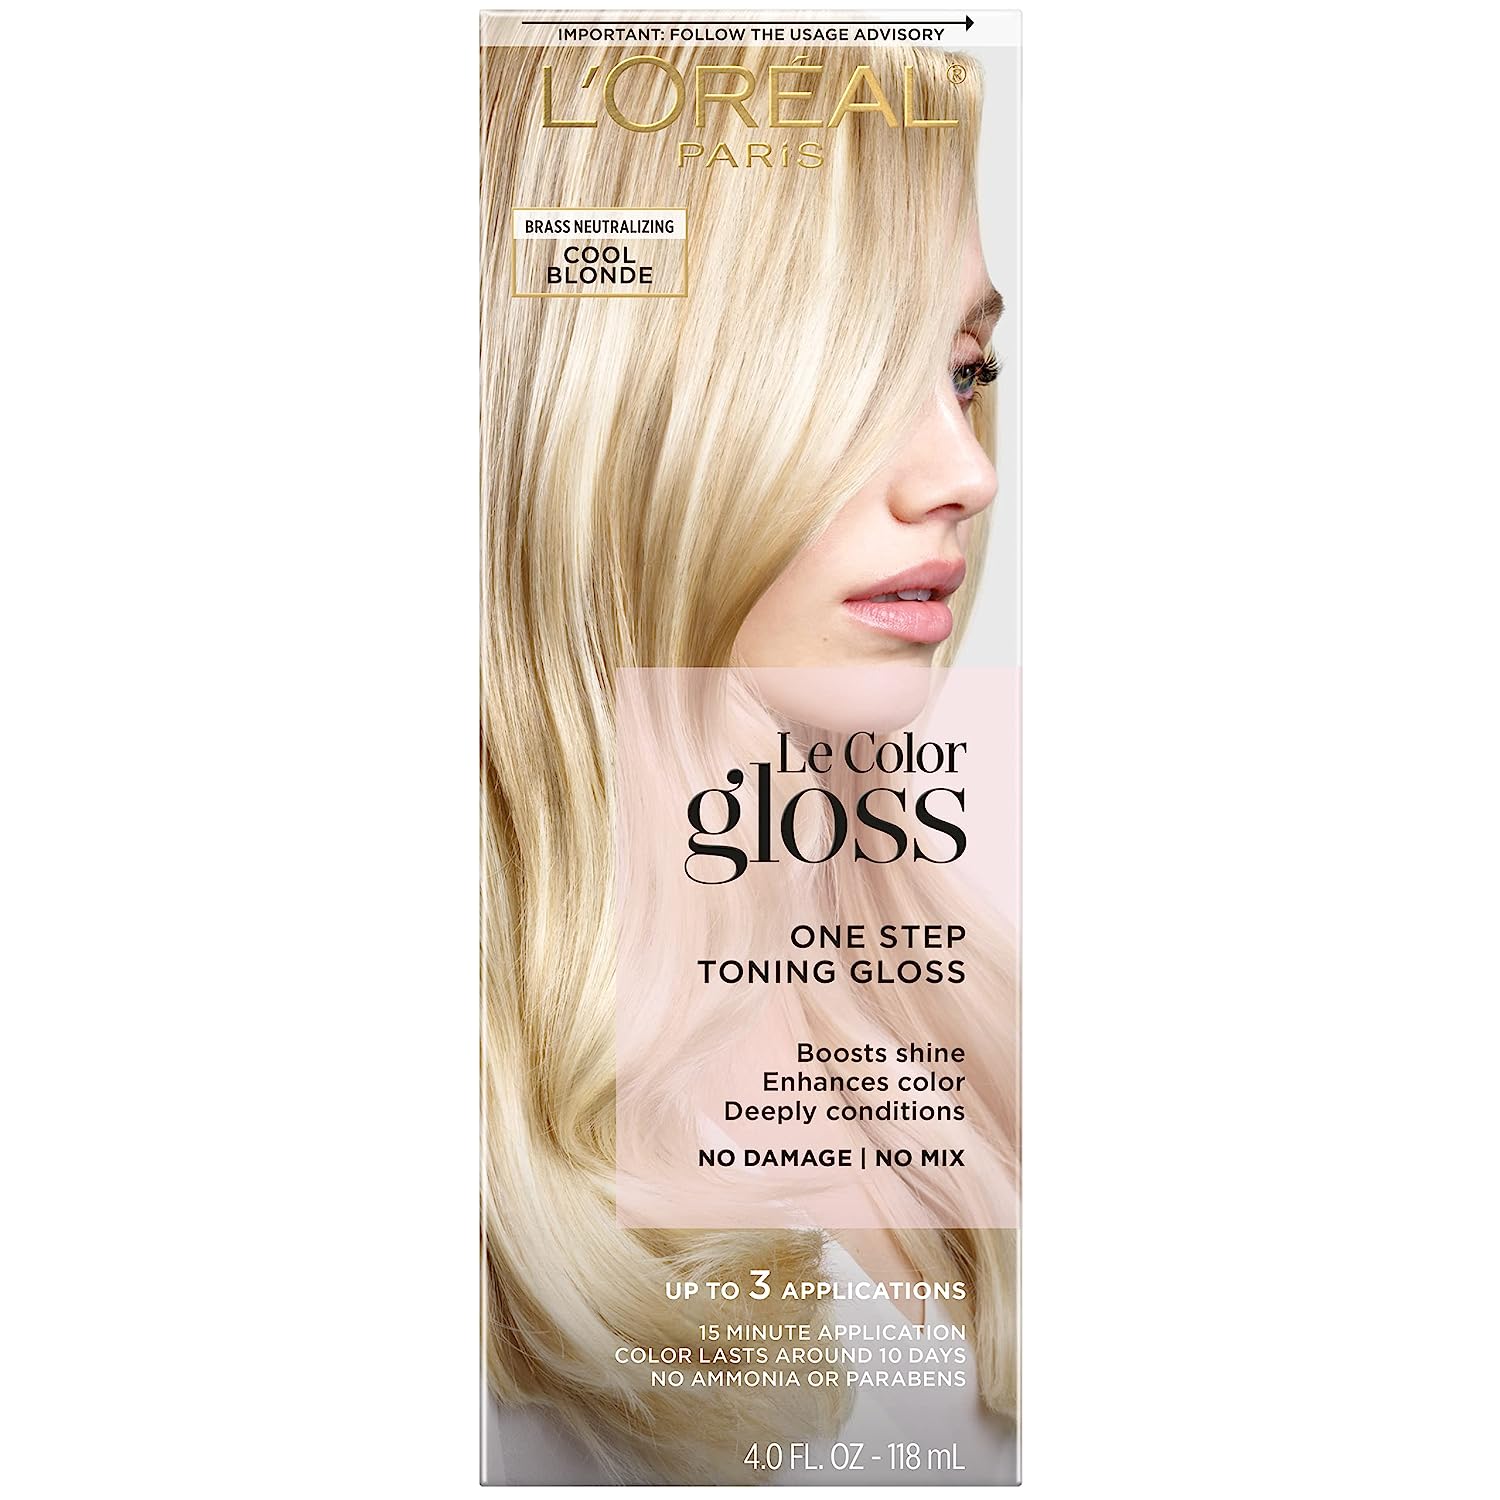 L'Oreal Paris Le Color One Step Hair Toning Gloss, [...]